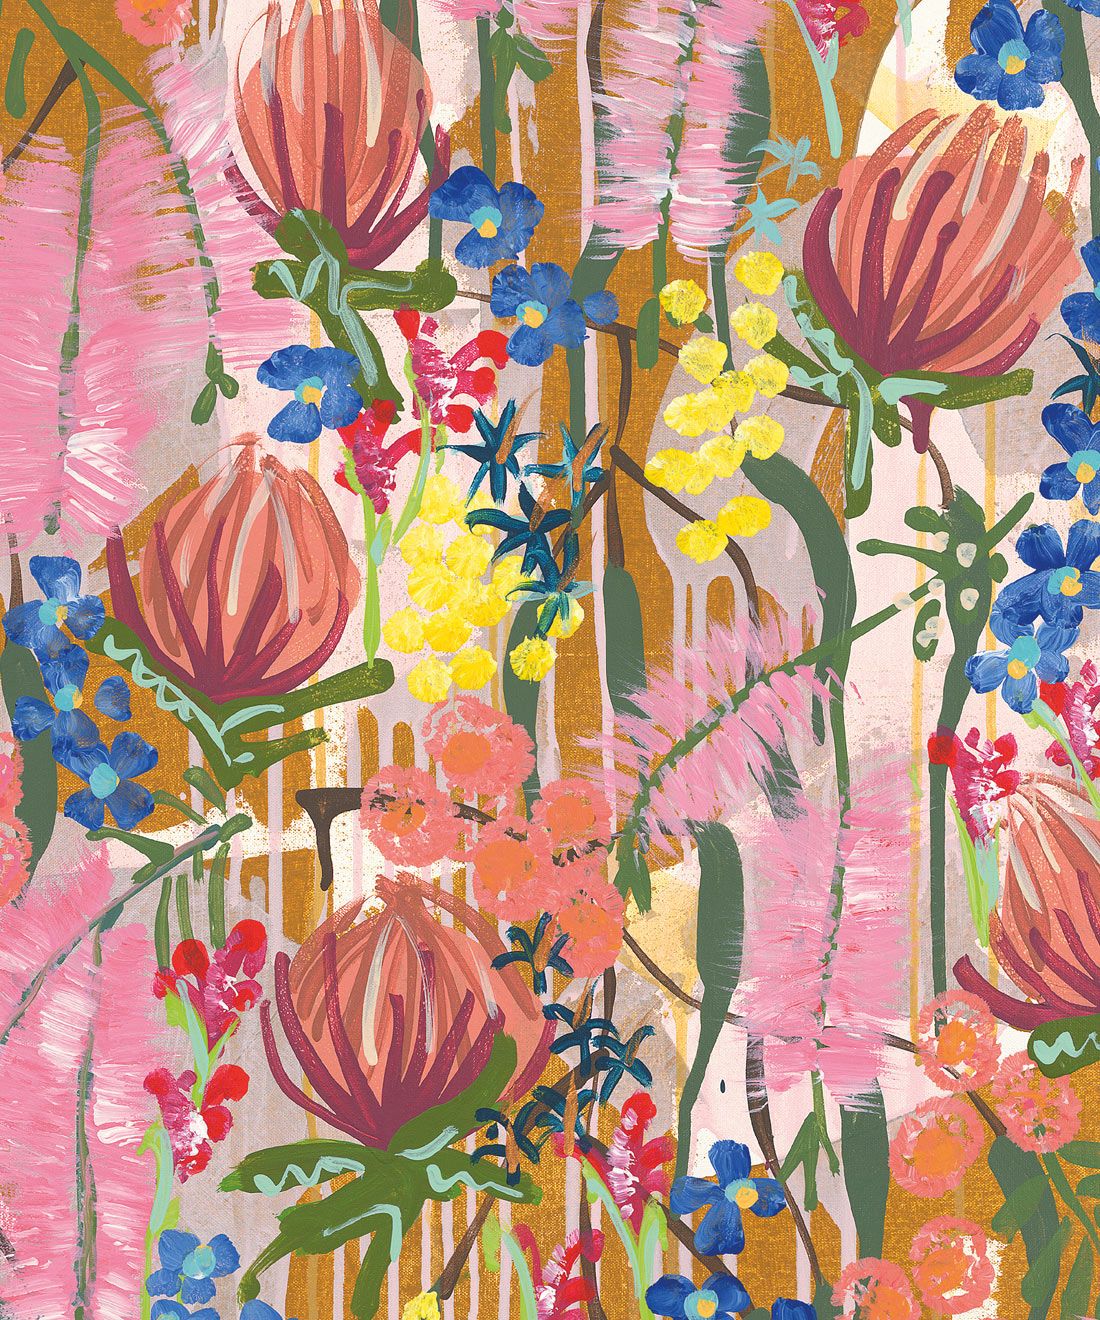 Acacia Wallpaper • Colorful Floral Wallpaper • Tiff Manuell • Abstract Expressionist Wallpaper • Swatch